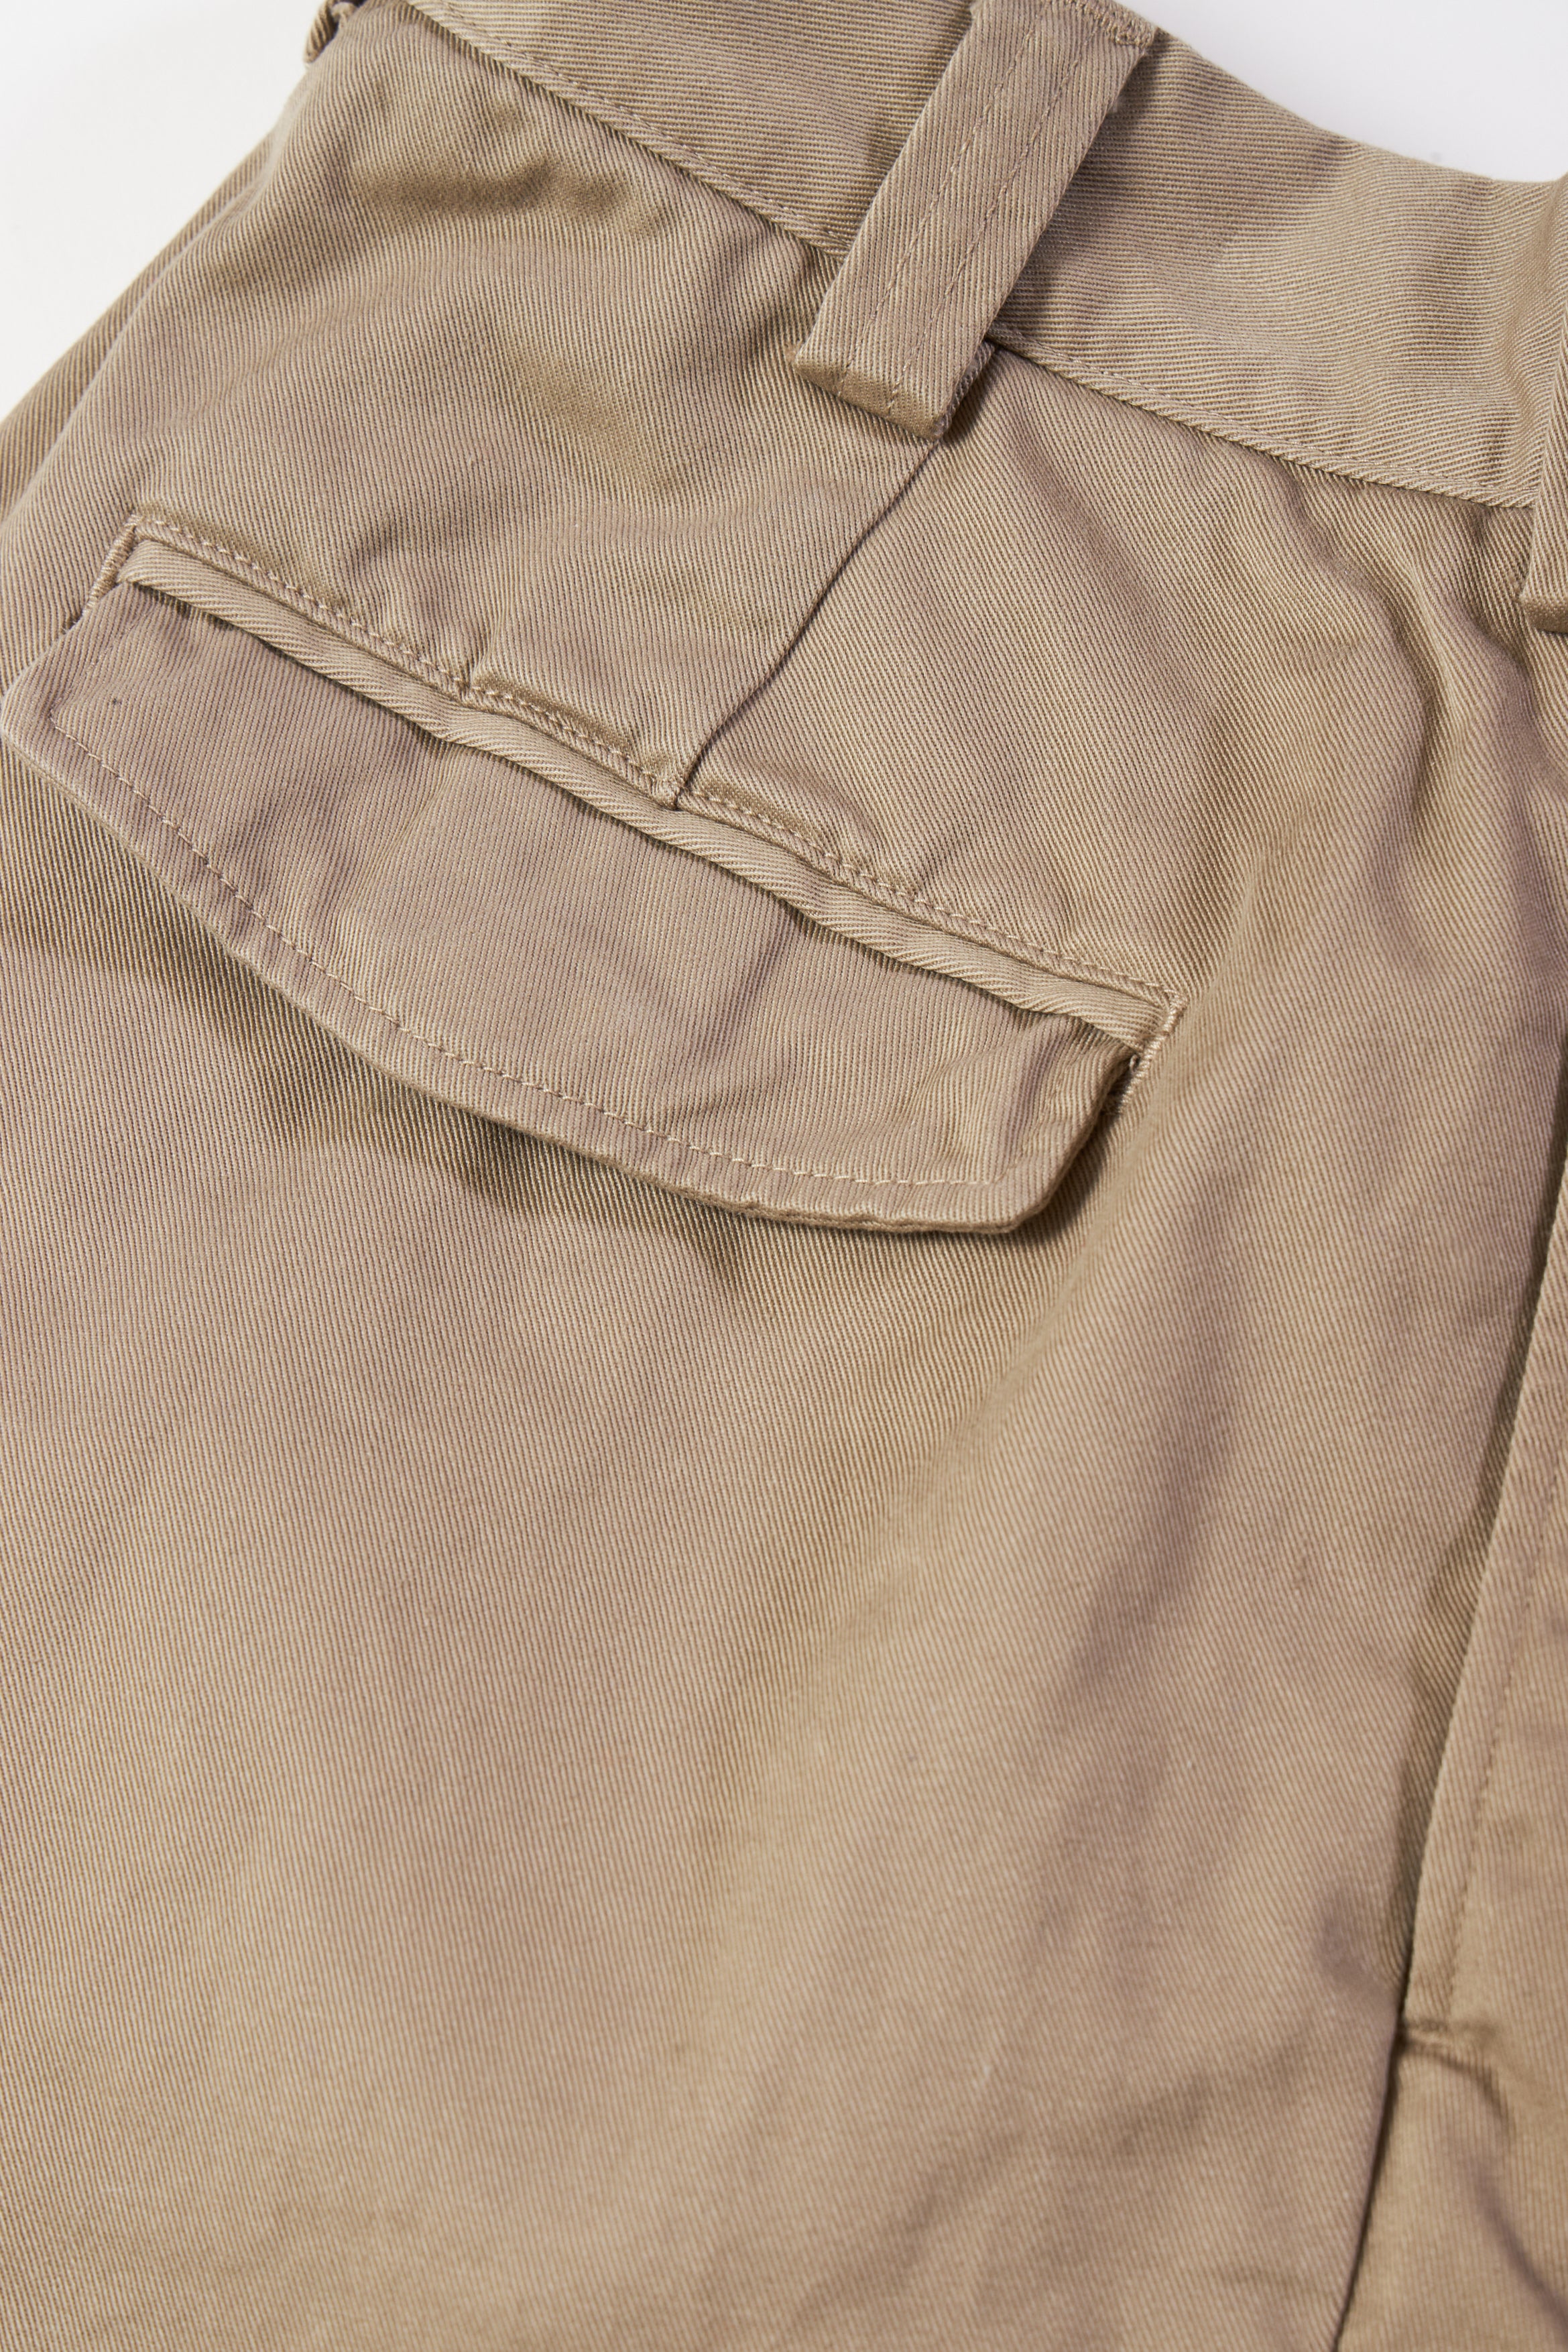 【Oblada】OFFICERS CHINO BEIGE